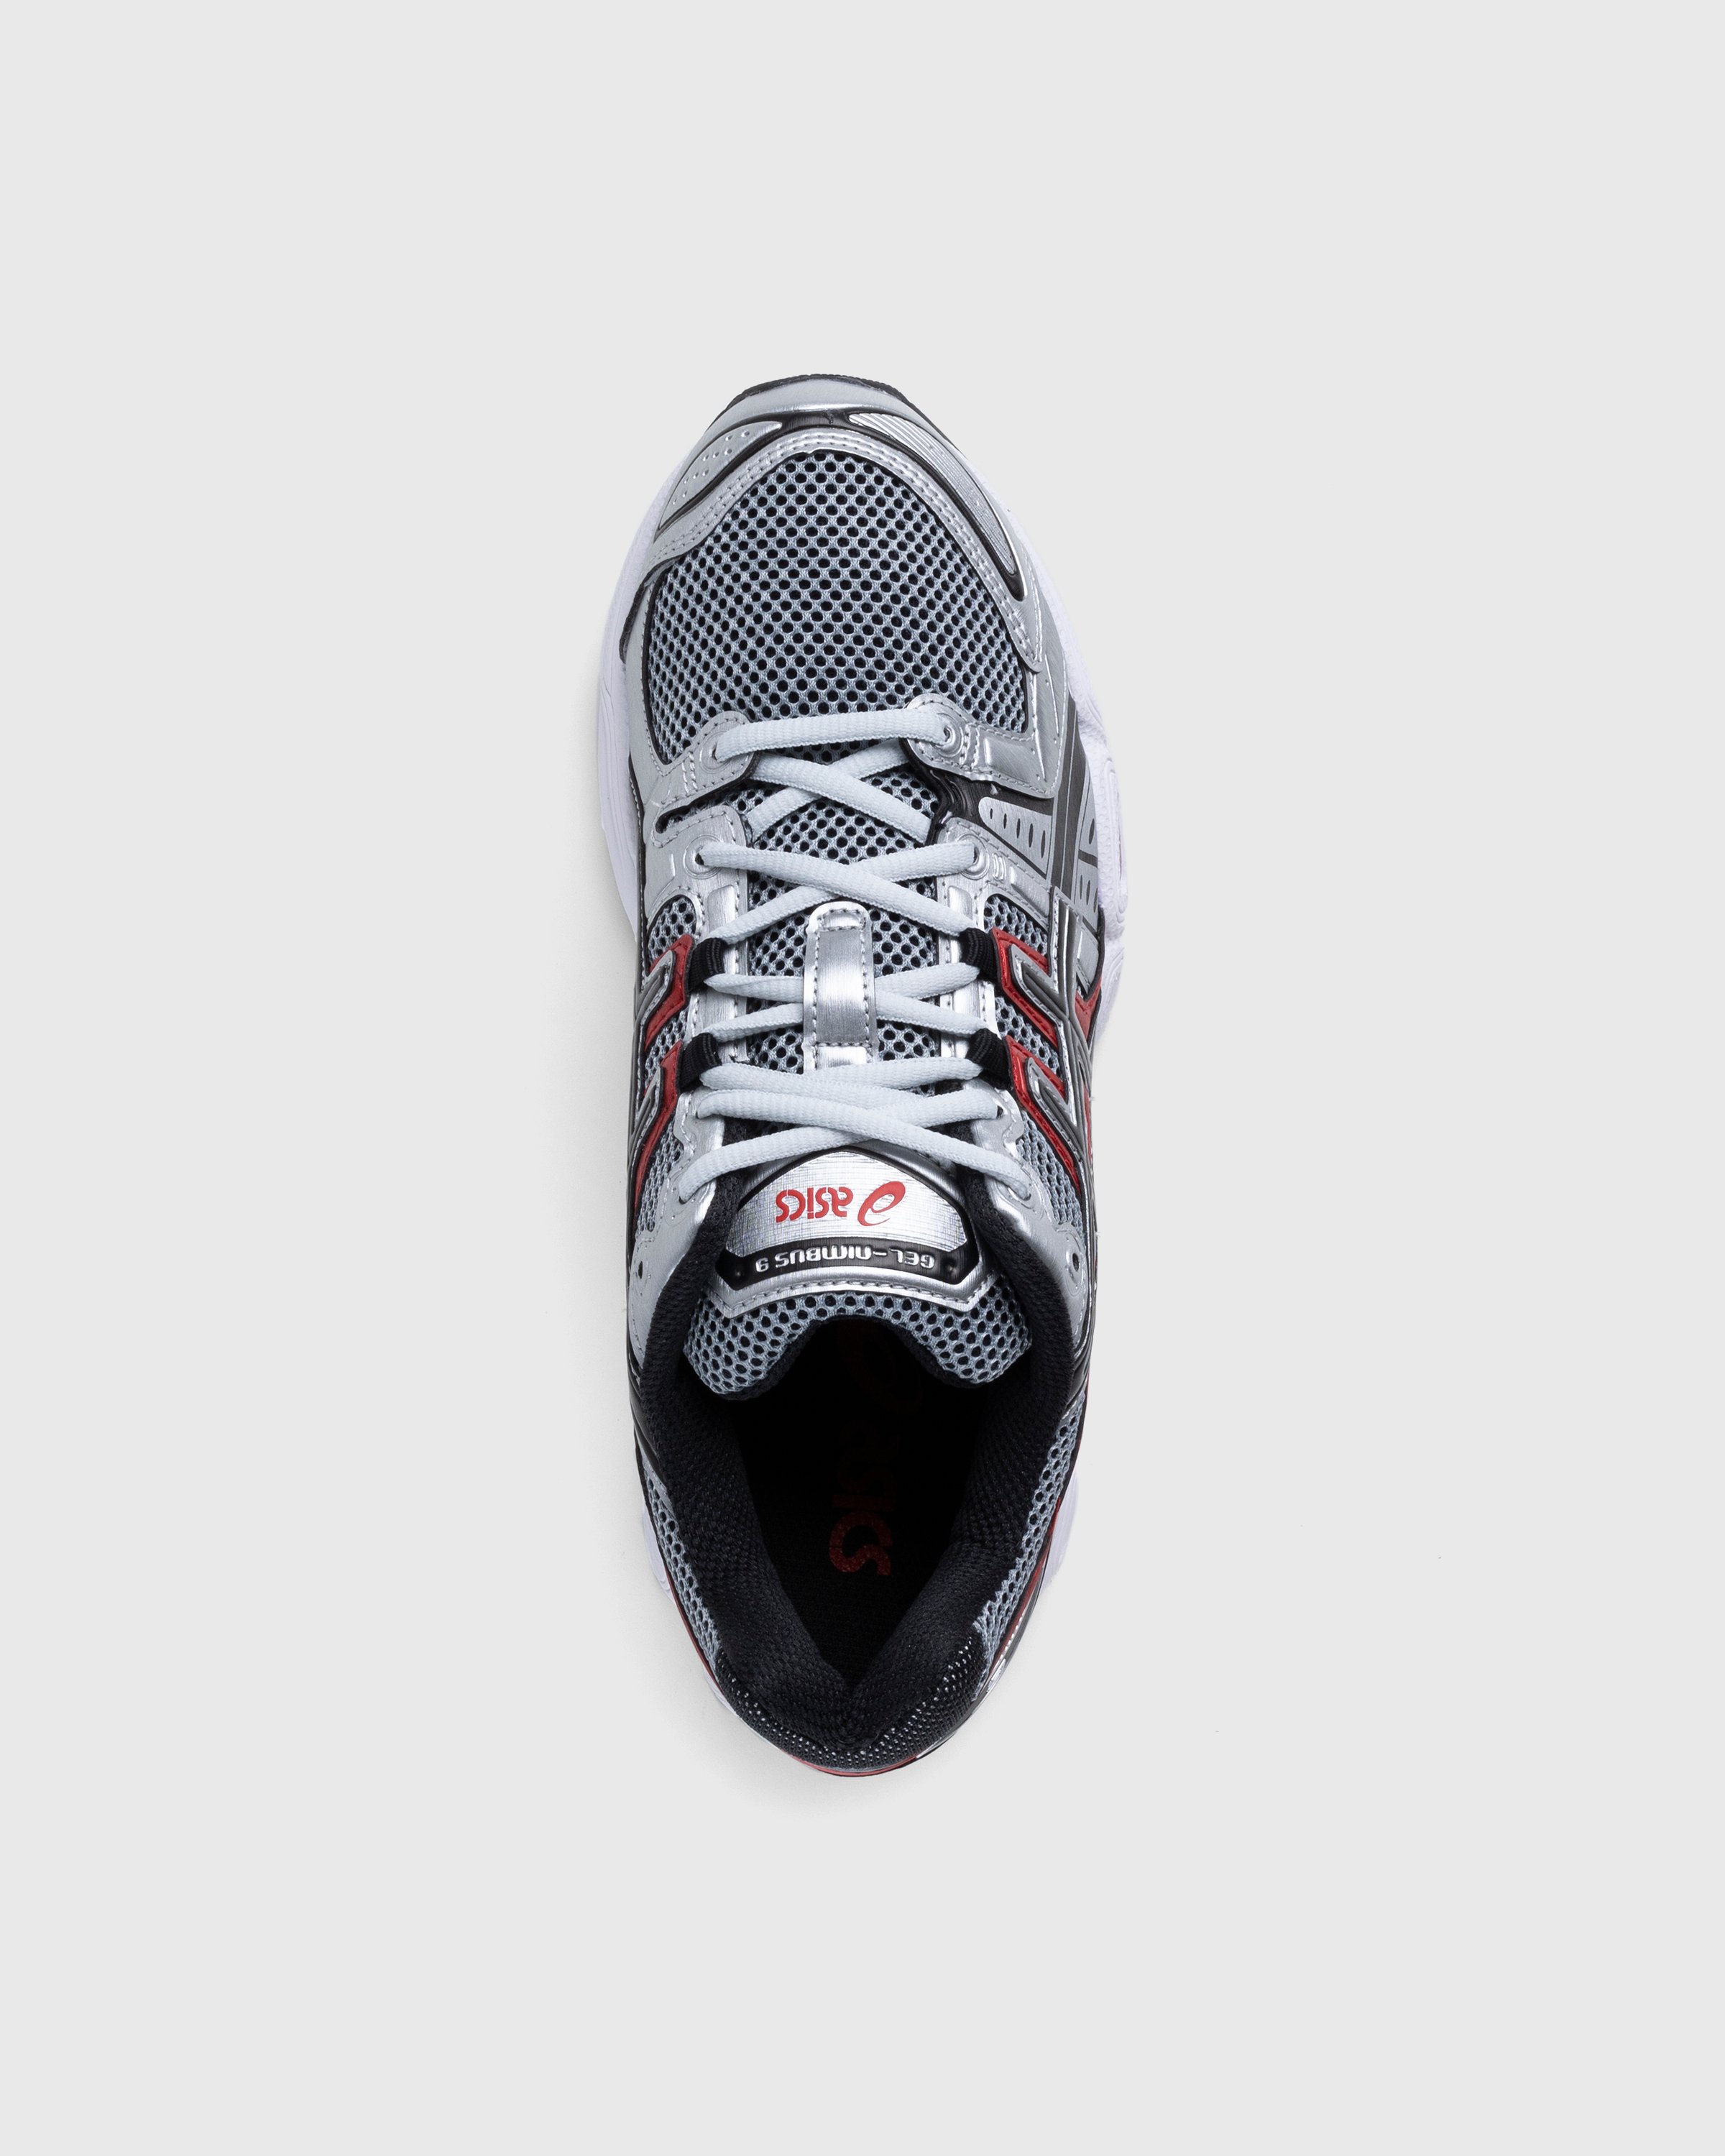 asics - Gel-Nimbus 9 Pure Silver/Classic Red - Footwear - Red - Image 3